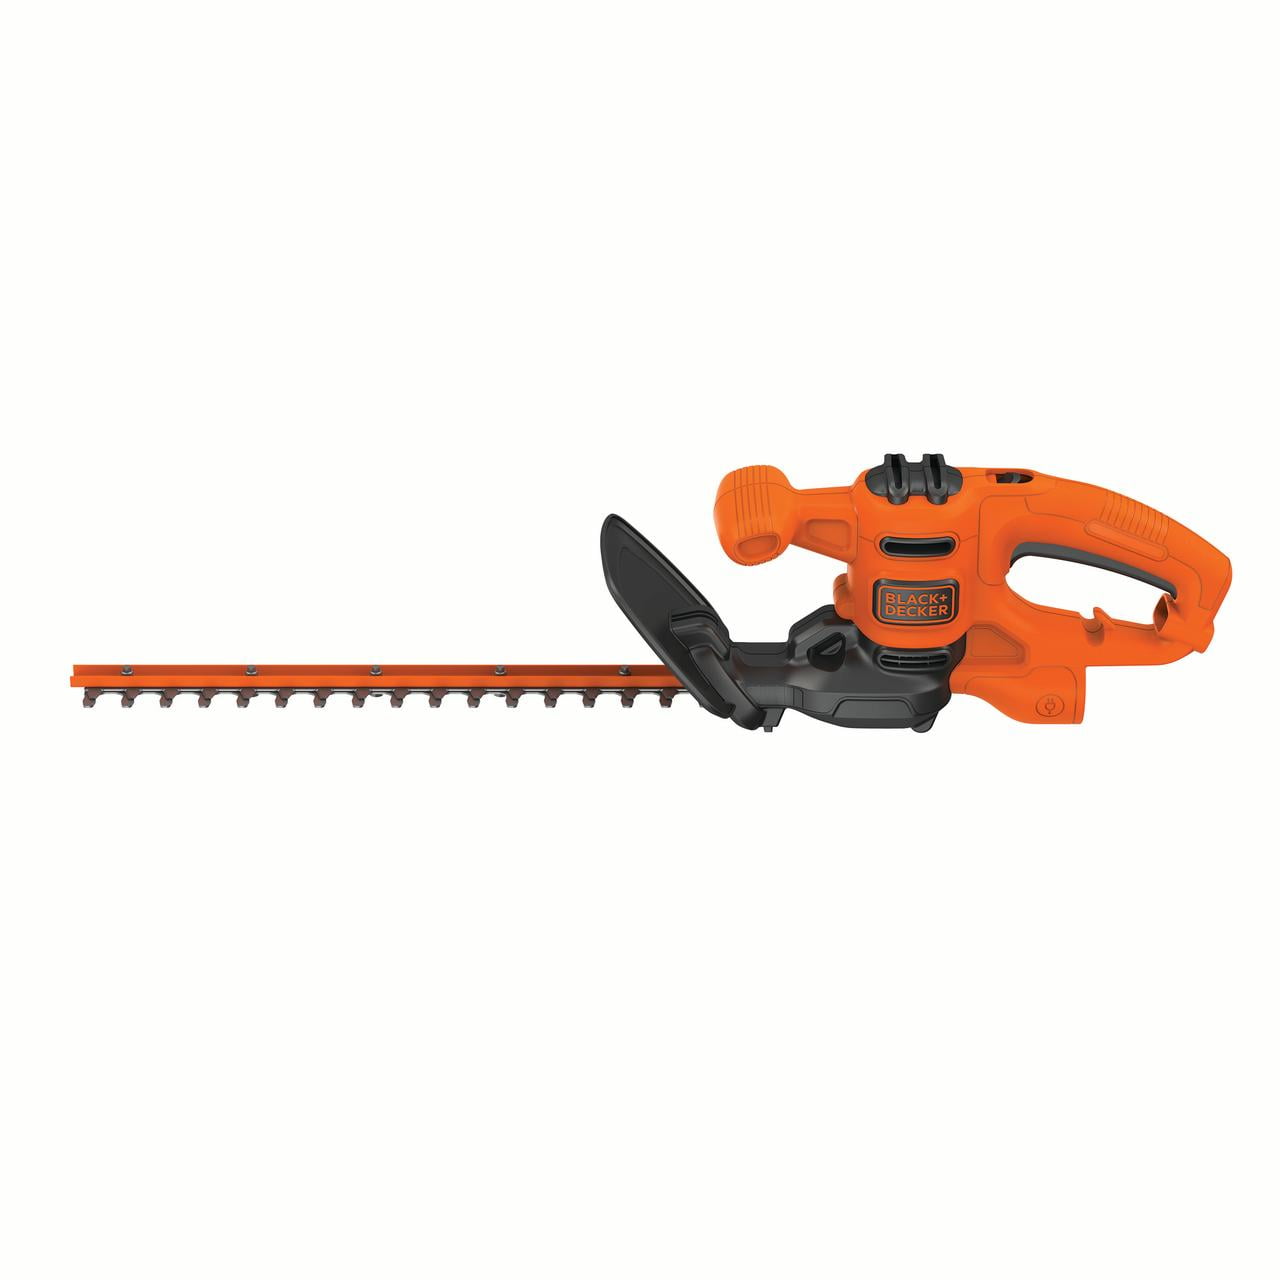 7305642 16 X 0.625 In. 3a Steel Corded Hedge Trimmer , Assorted